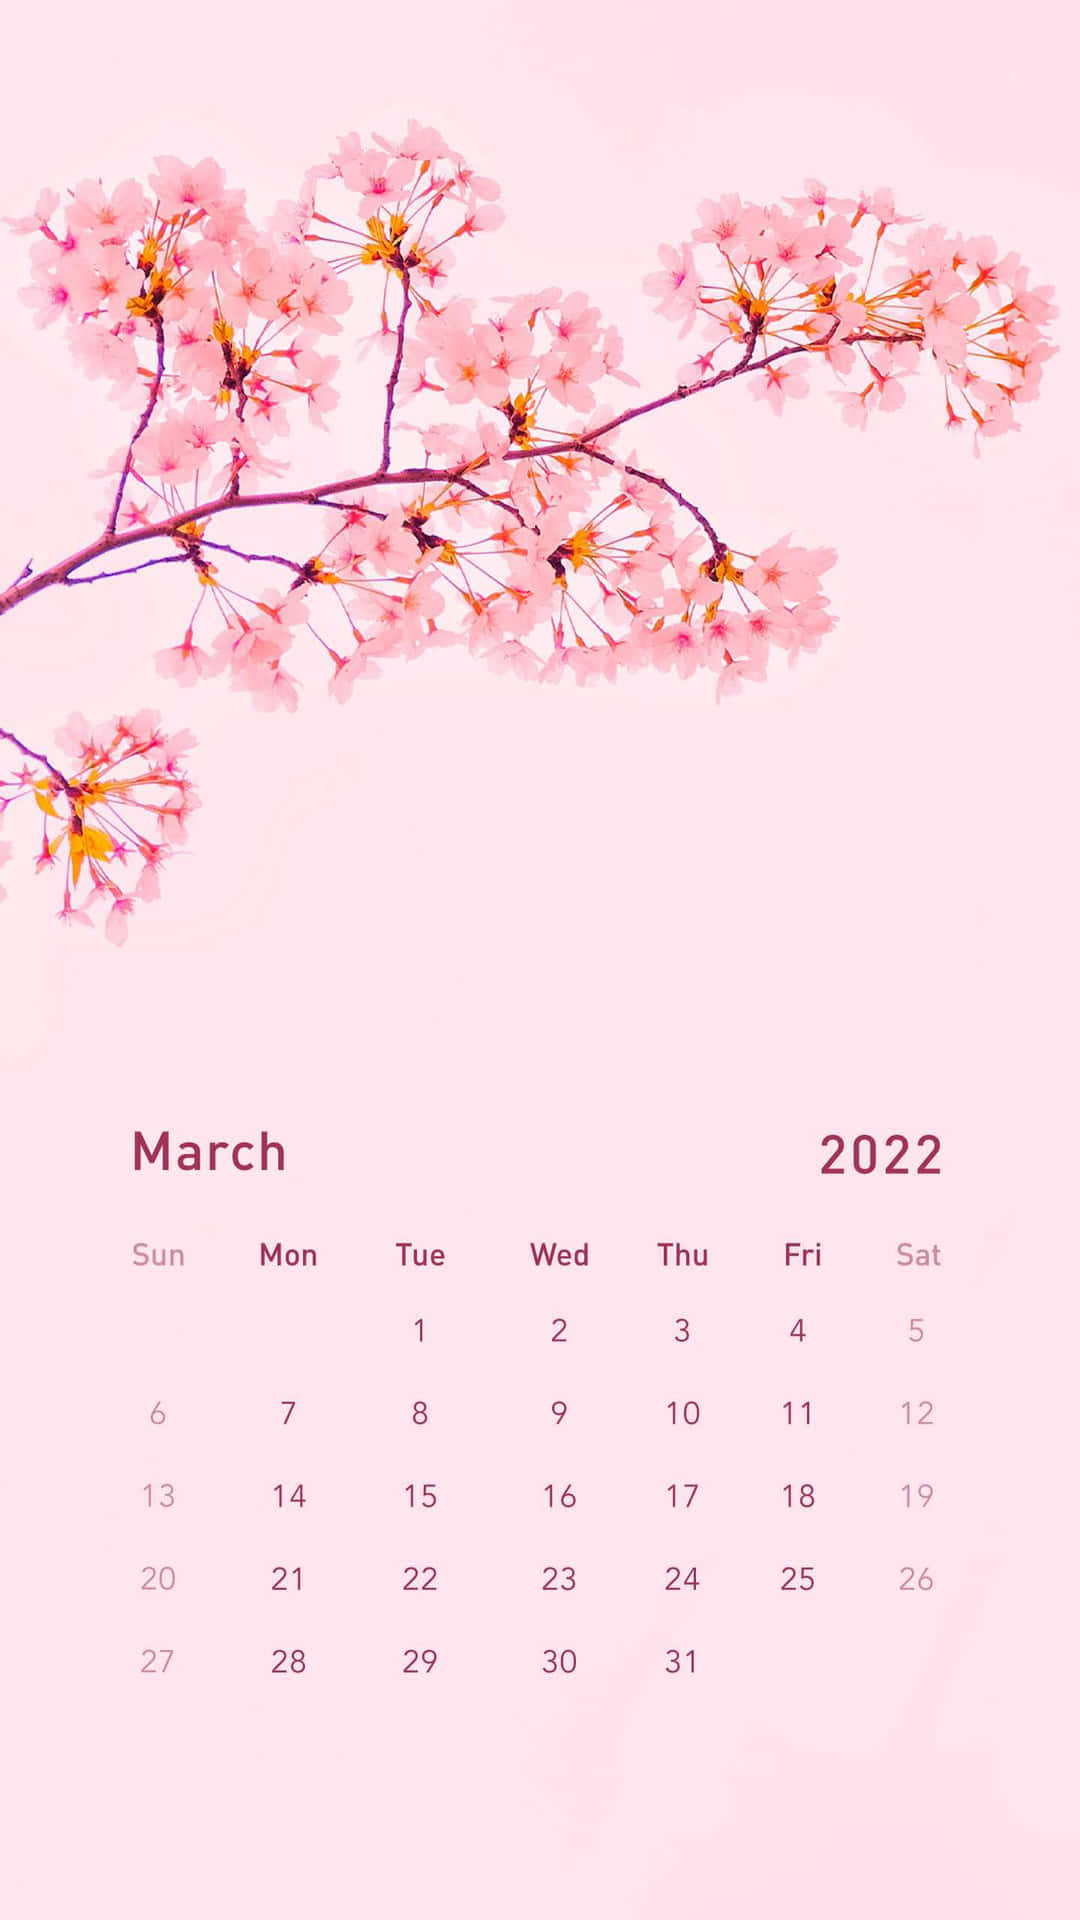 "Welcome in sunny, beautiful March!" Wallpaper